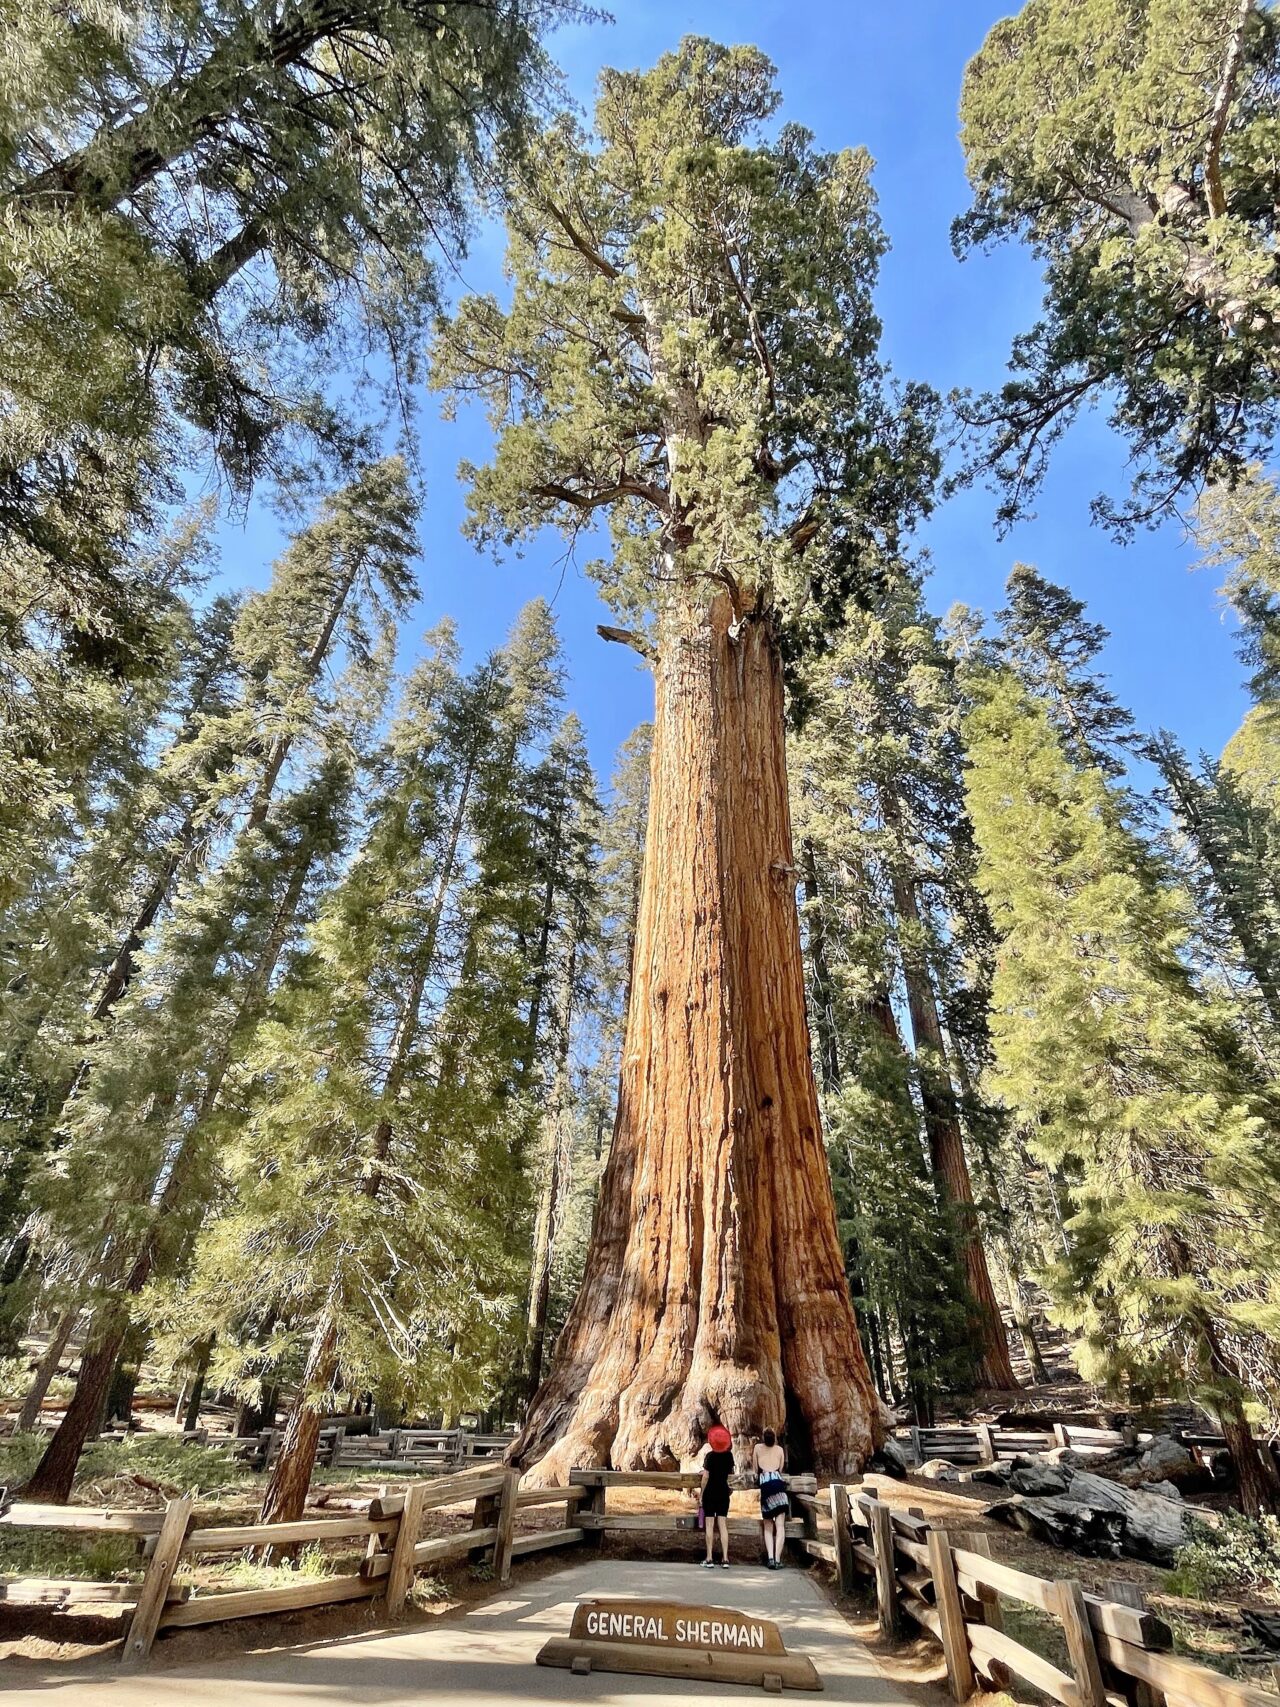 Standing 275 feet tall, California’s General Sherman Giant Sequoia is the world’s largest tree by volume. It was the third named Champion Tree and is one of only three to have retained its Champion Tree status throughout the history of the program. Marty Aligata / Wikimedia